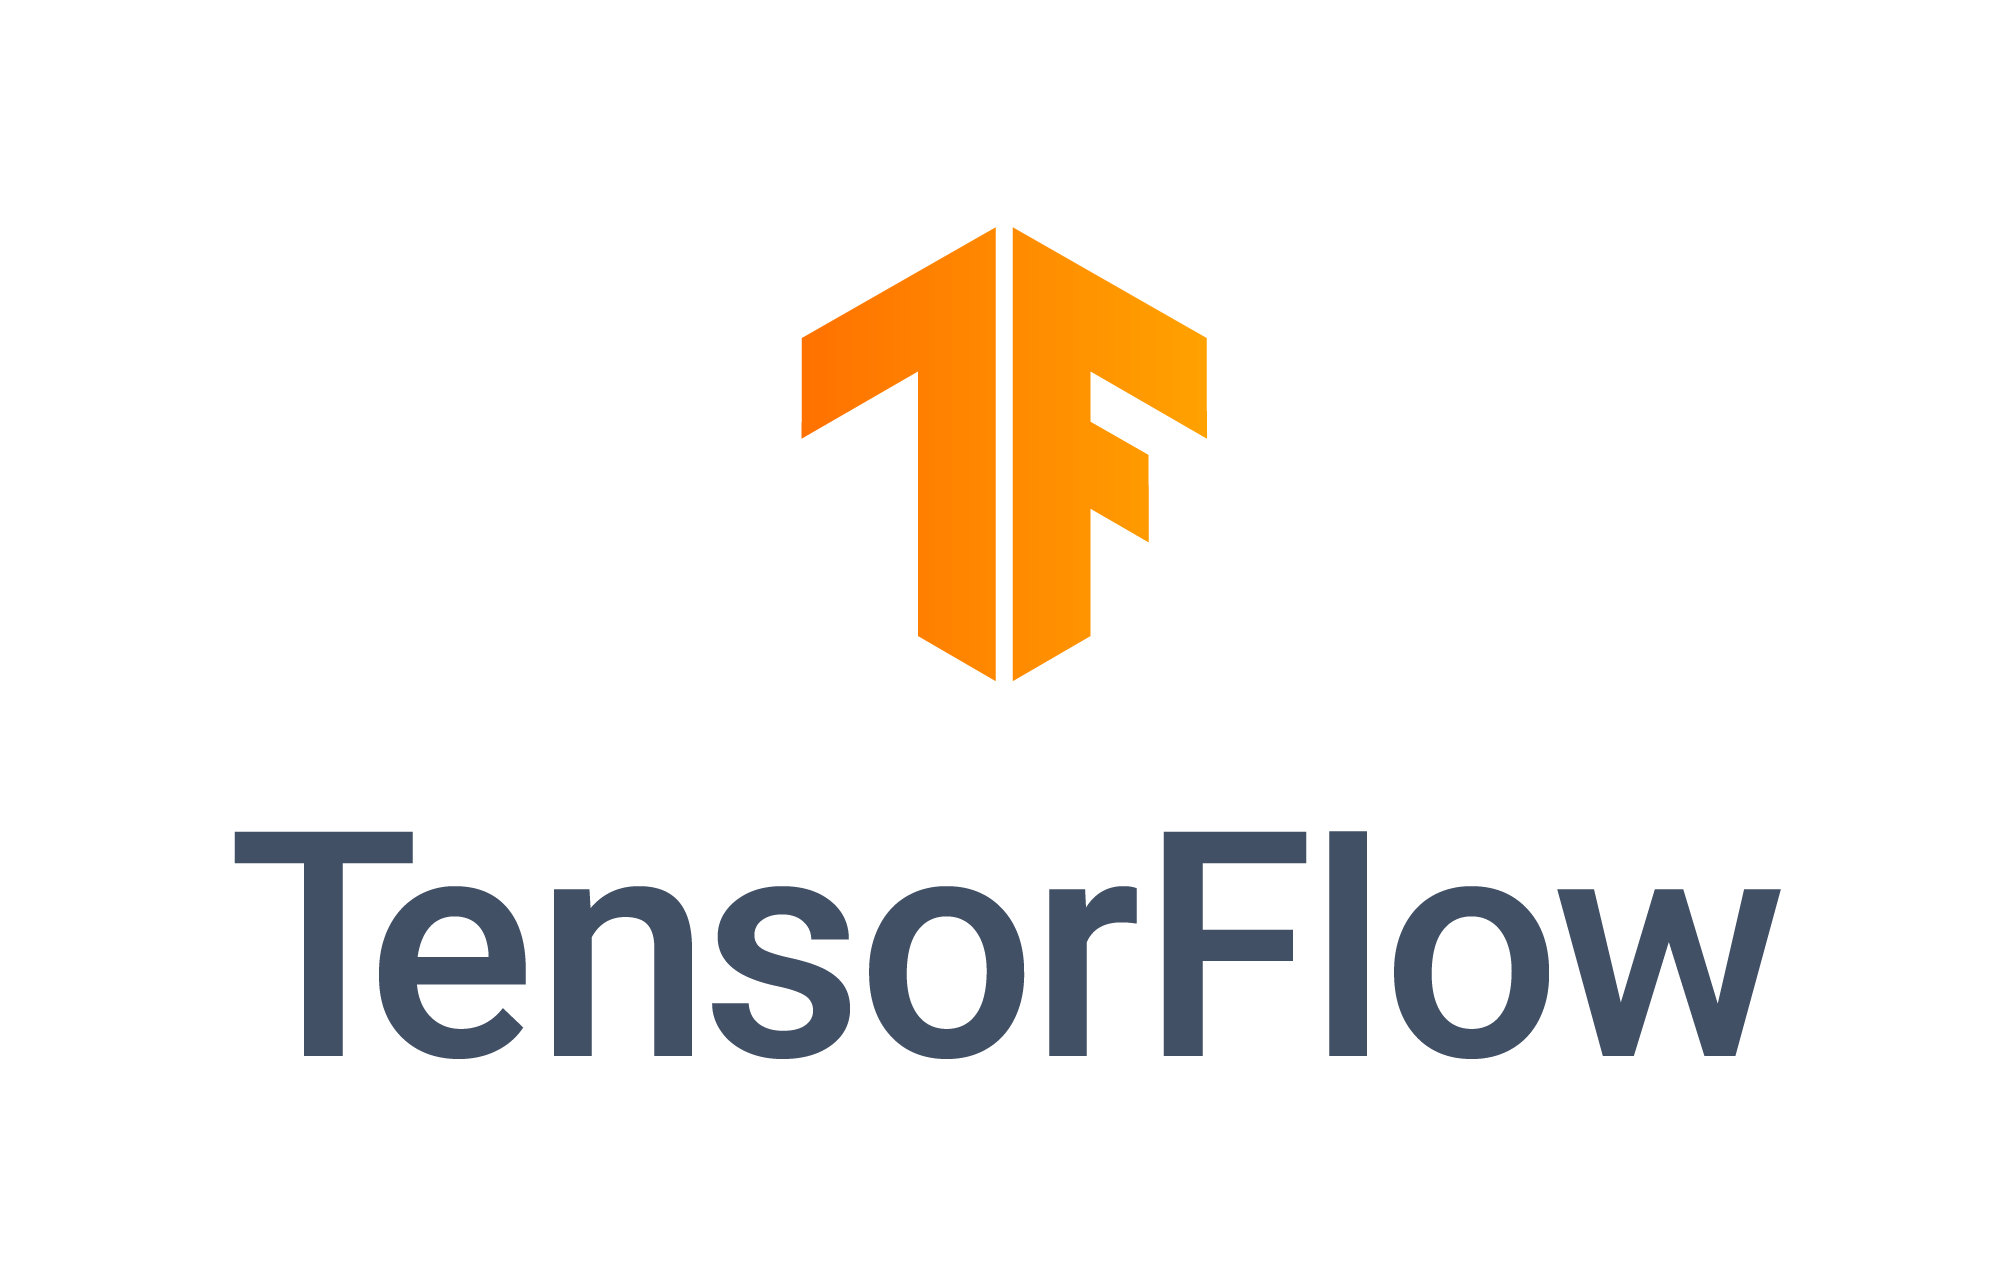 Image Classification with TensorFlow